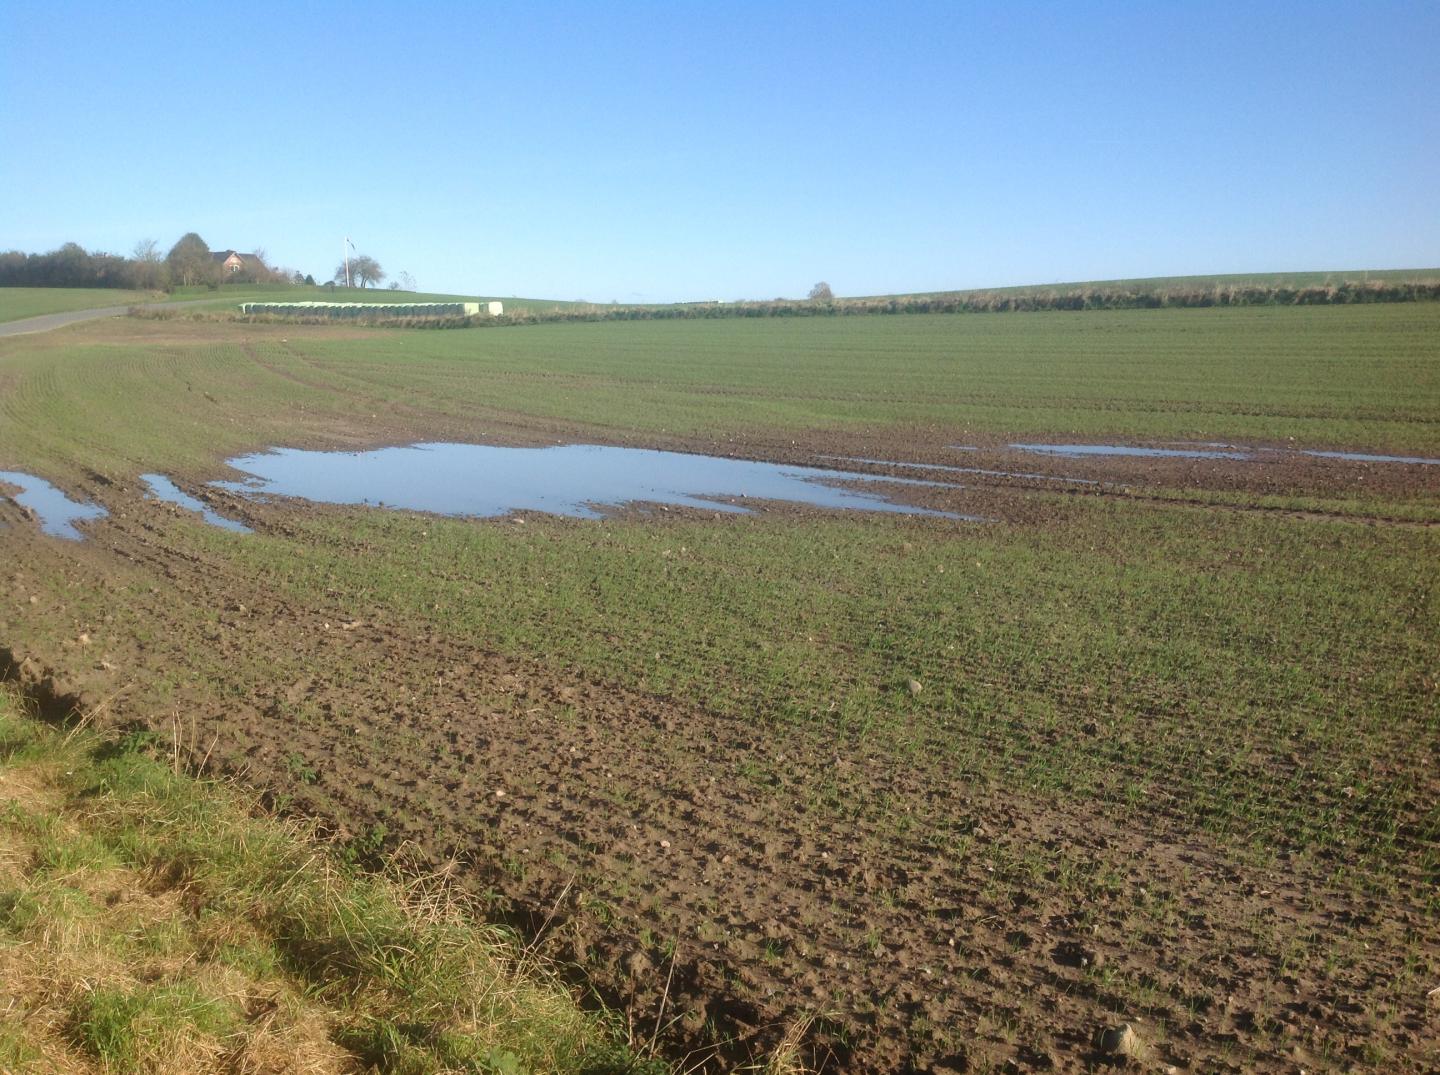 Wheat Suffered From Flooding after the Winter of 2017/2018